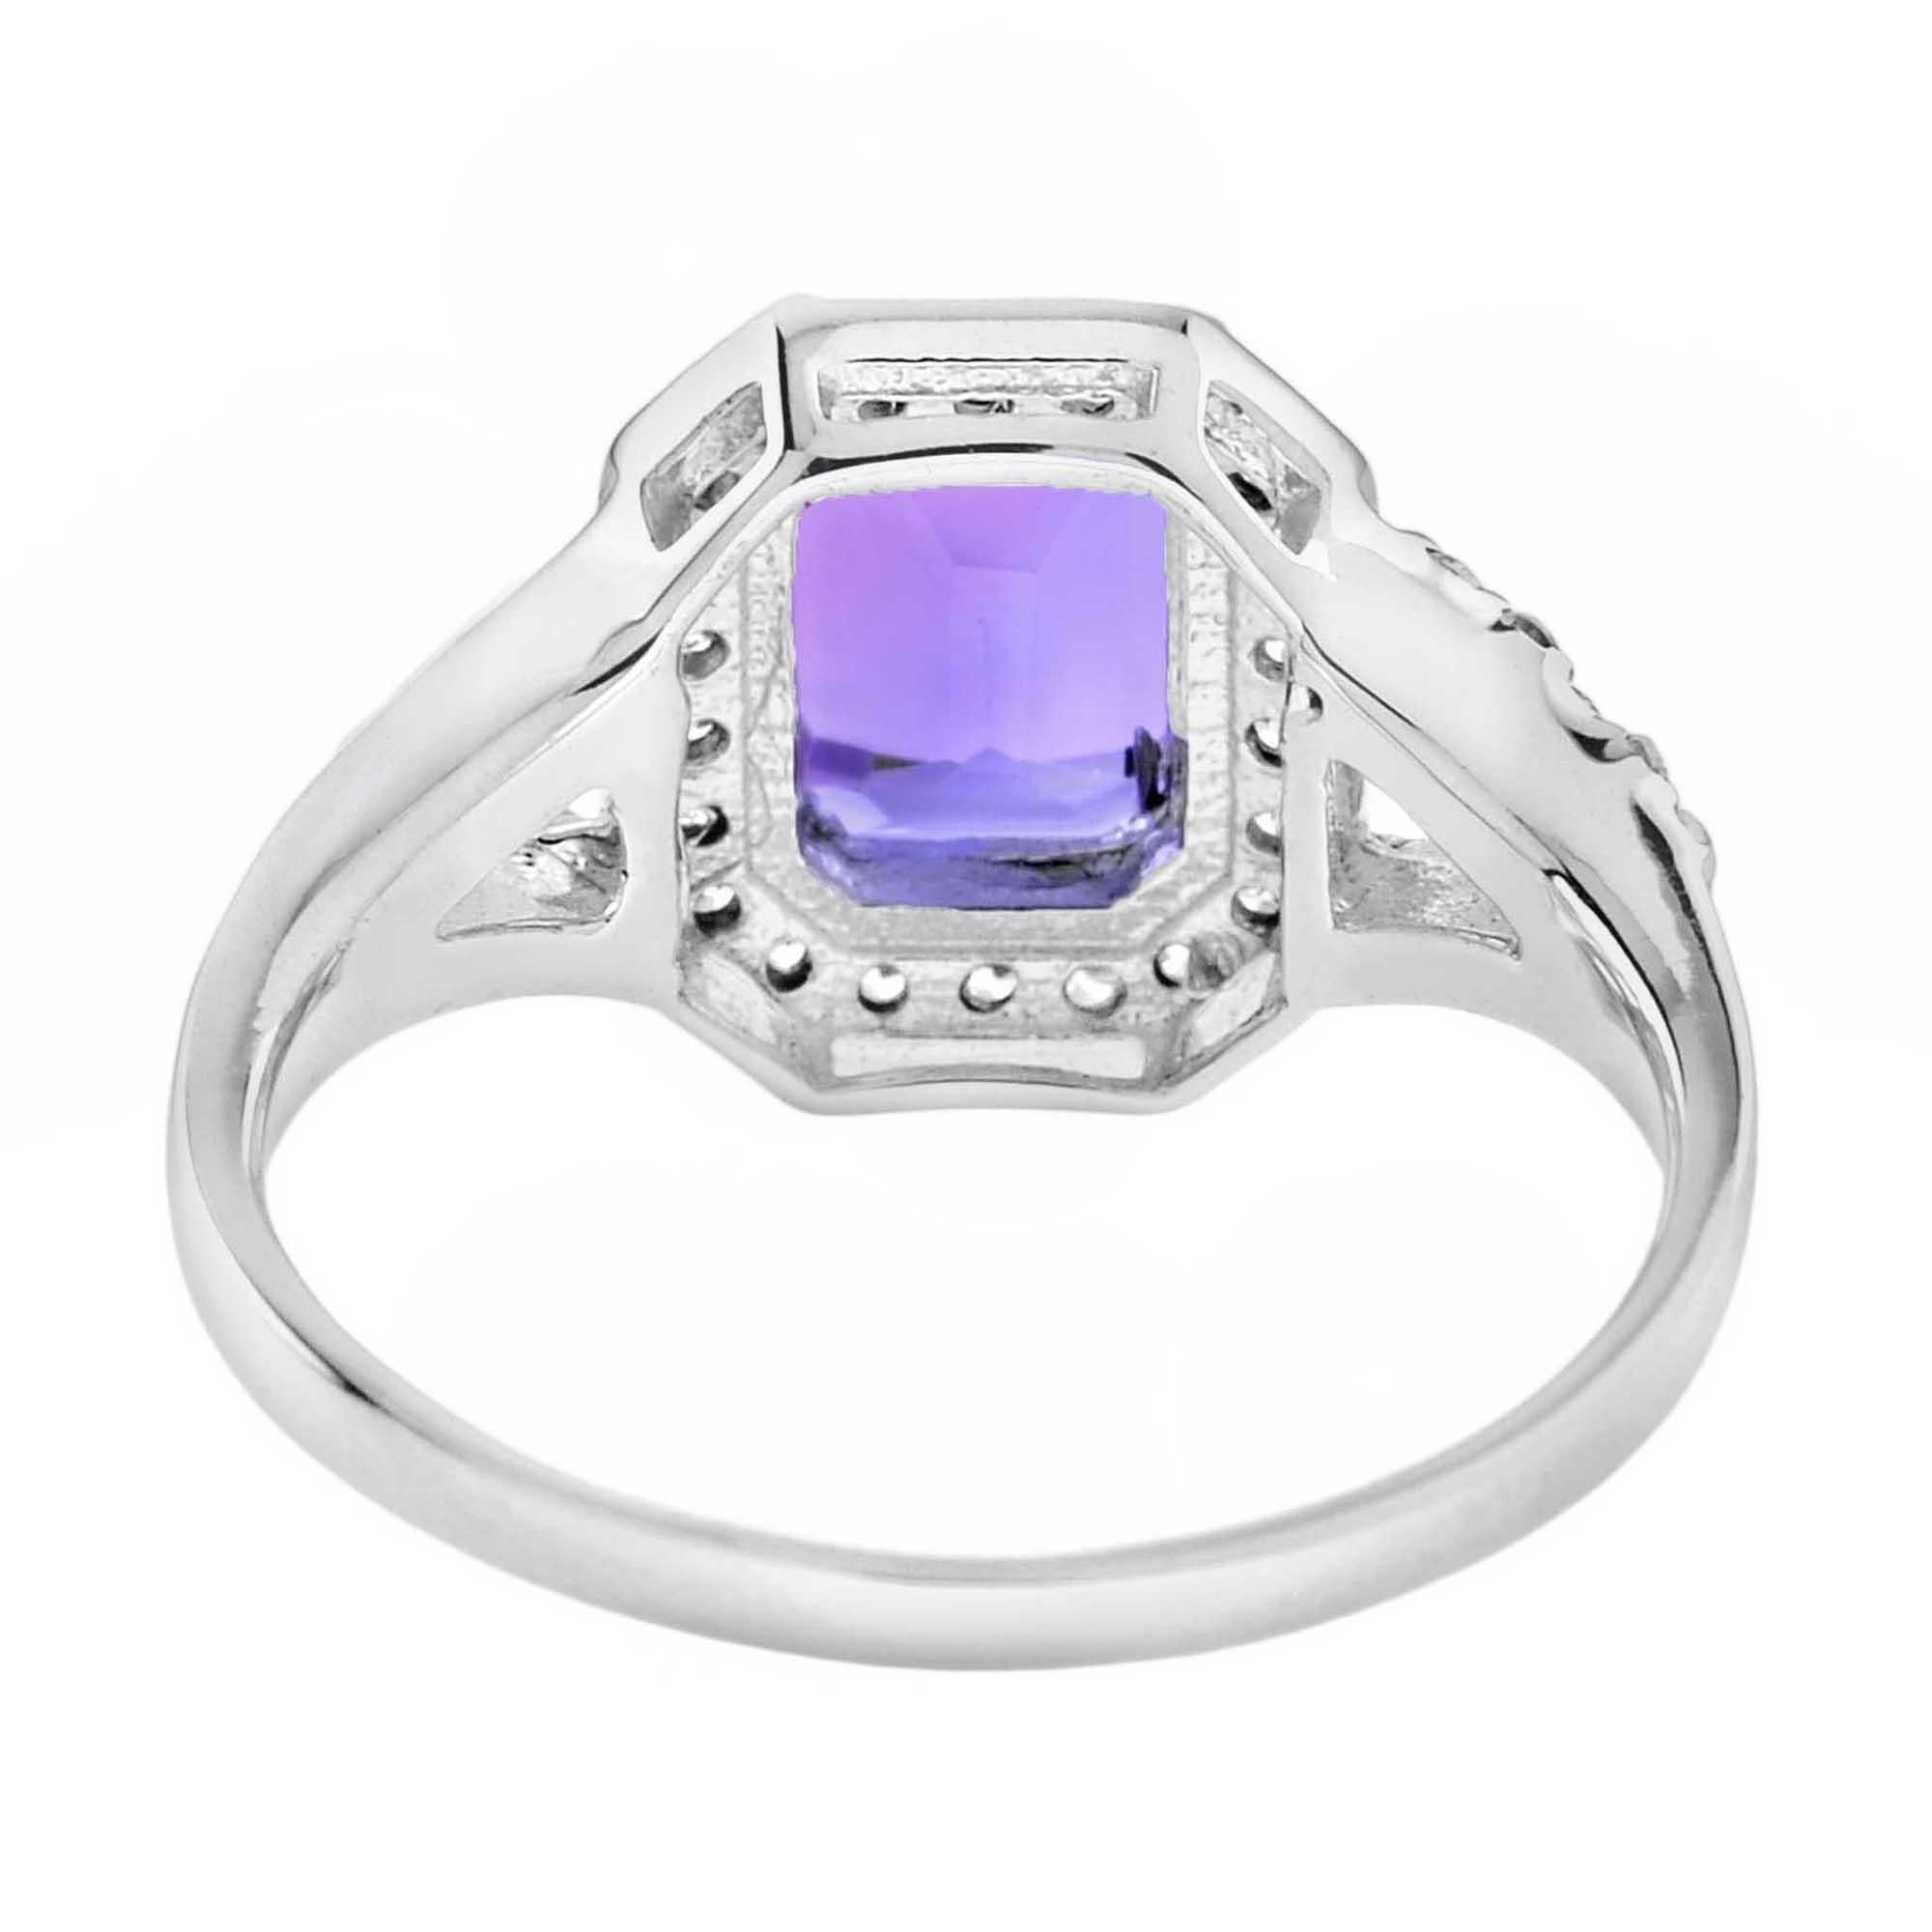 For Sale:  Emerald Cut Amethyst and Diamond Split Shank Engagement Ring in 18K White Gold 4